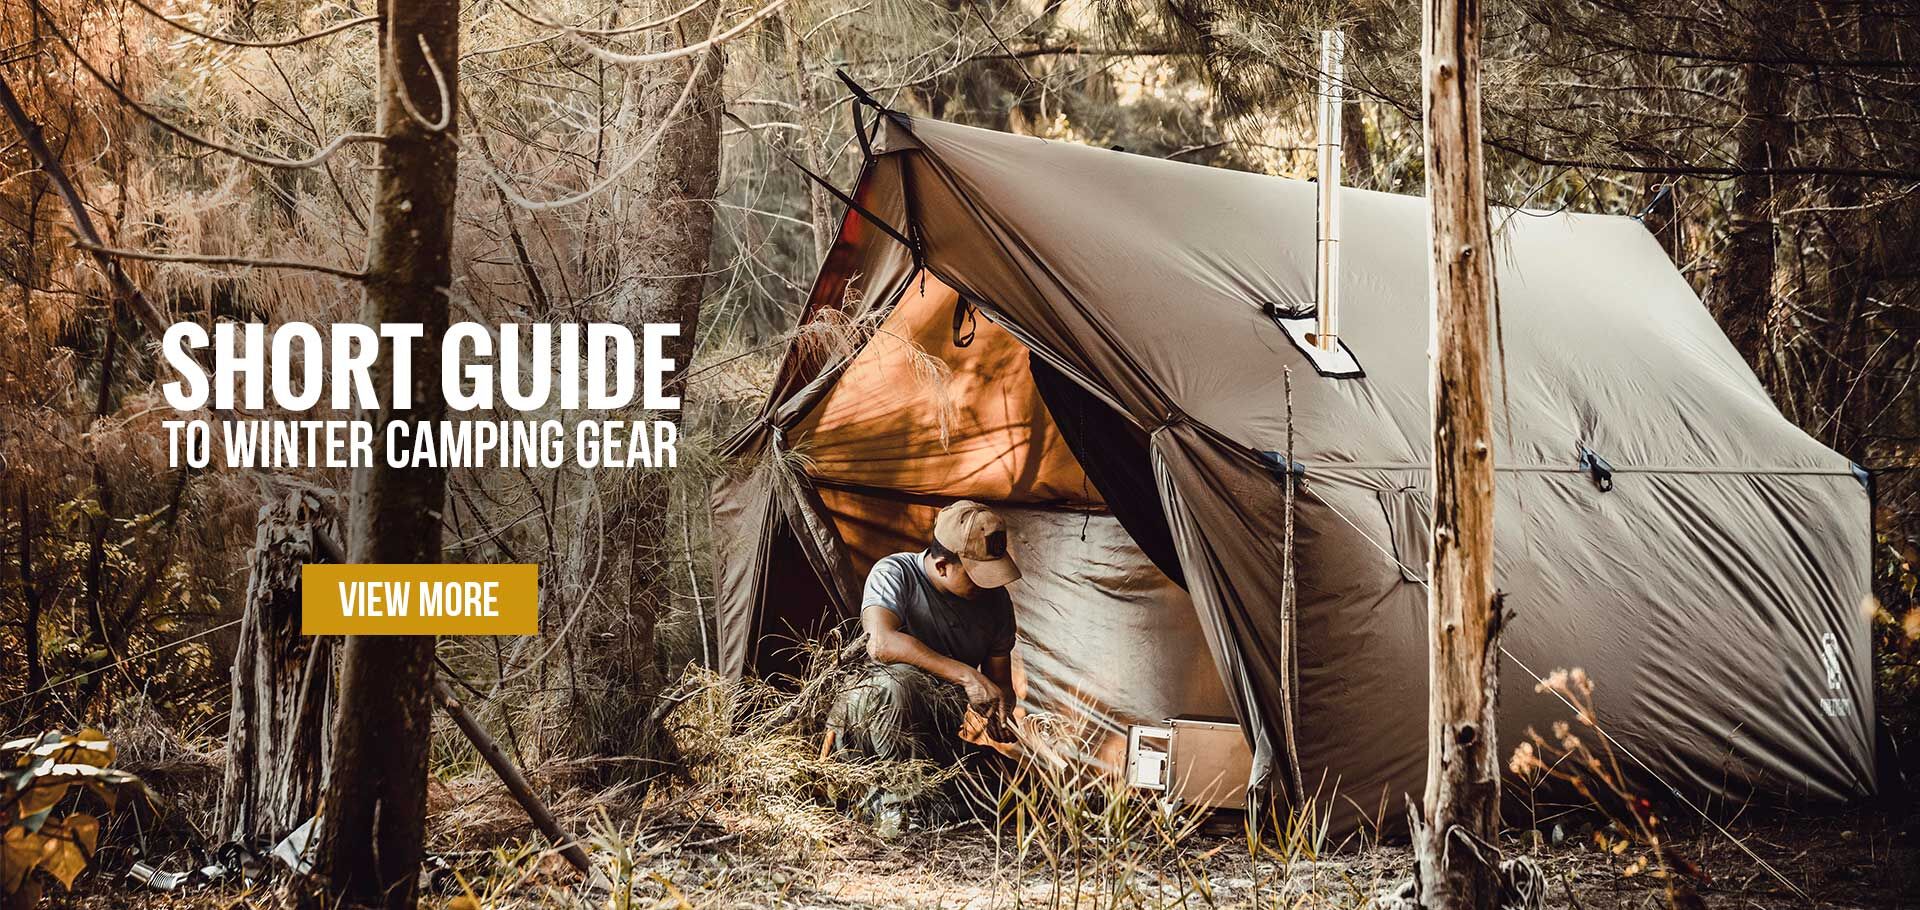 SHORT GUIDE TO WINTER CAMPING GEAR